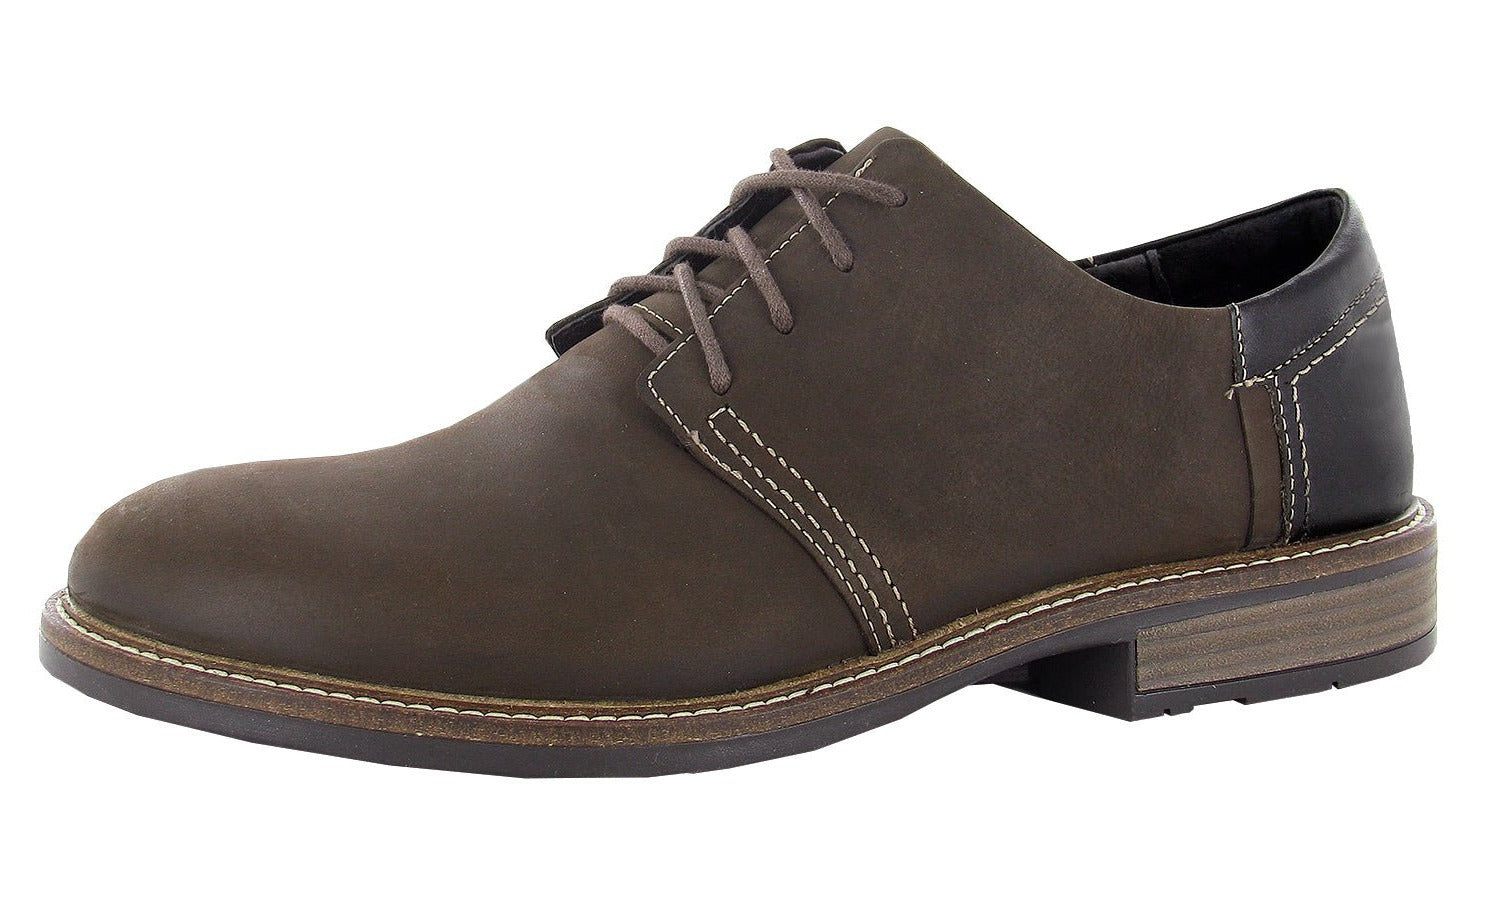 Chief | Oily Brown Nubuck/French Roast Leather - Shoe - Naot